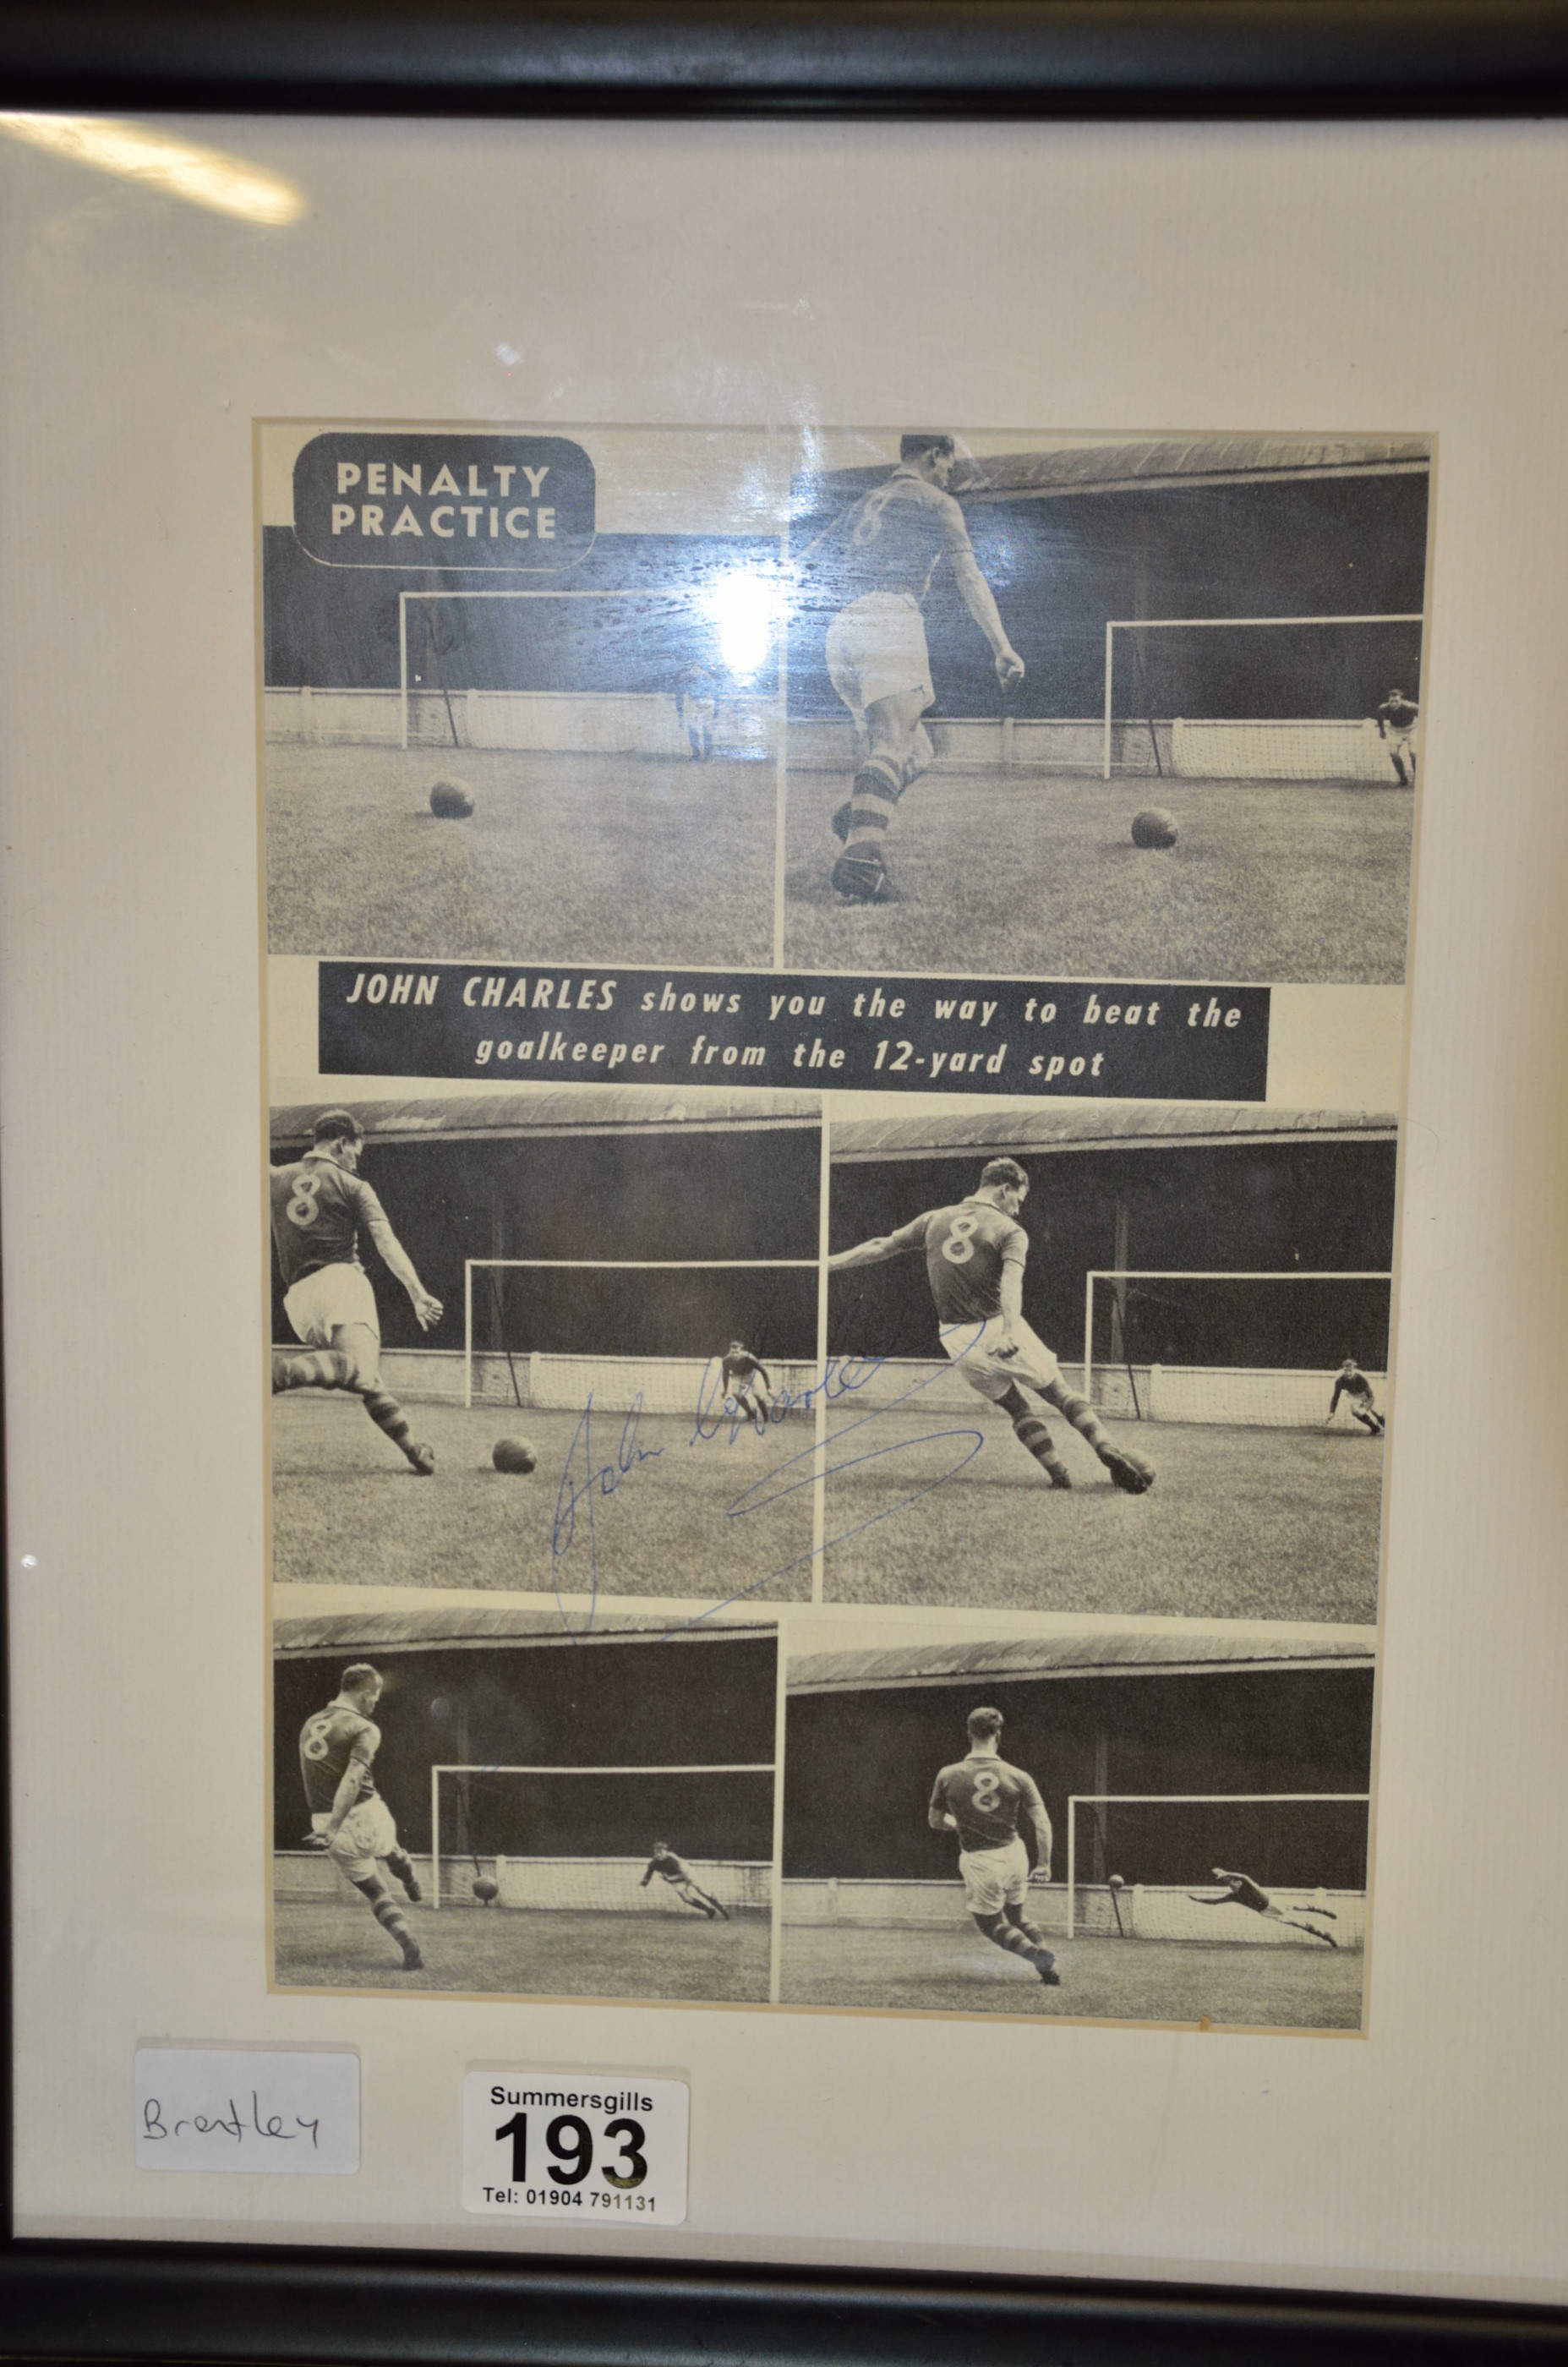 Signed 1950s penalty practice print by Leeds United's John Charles